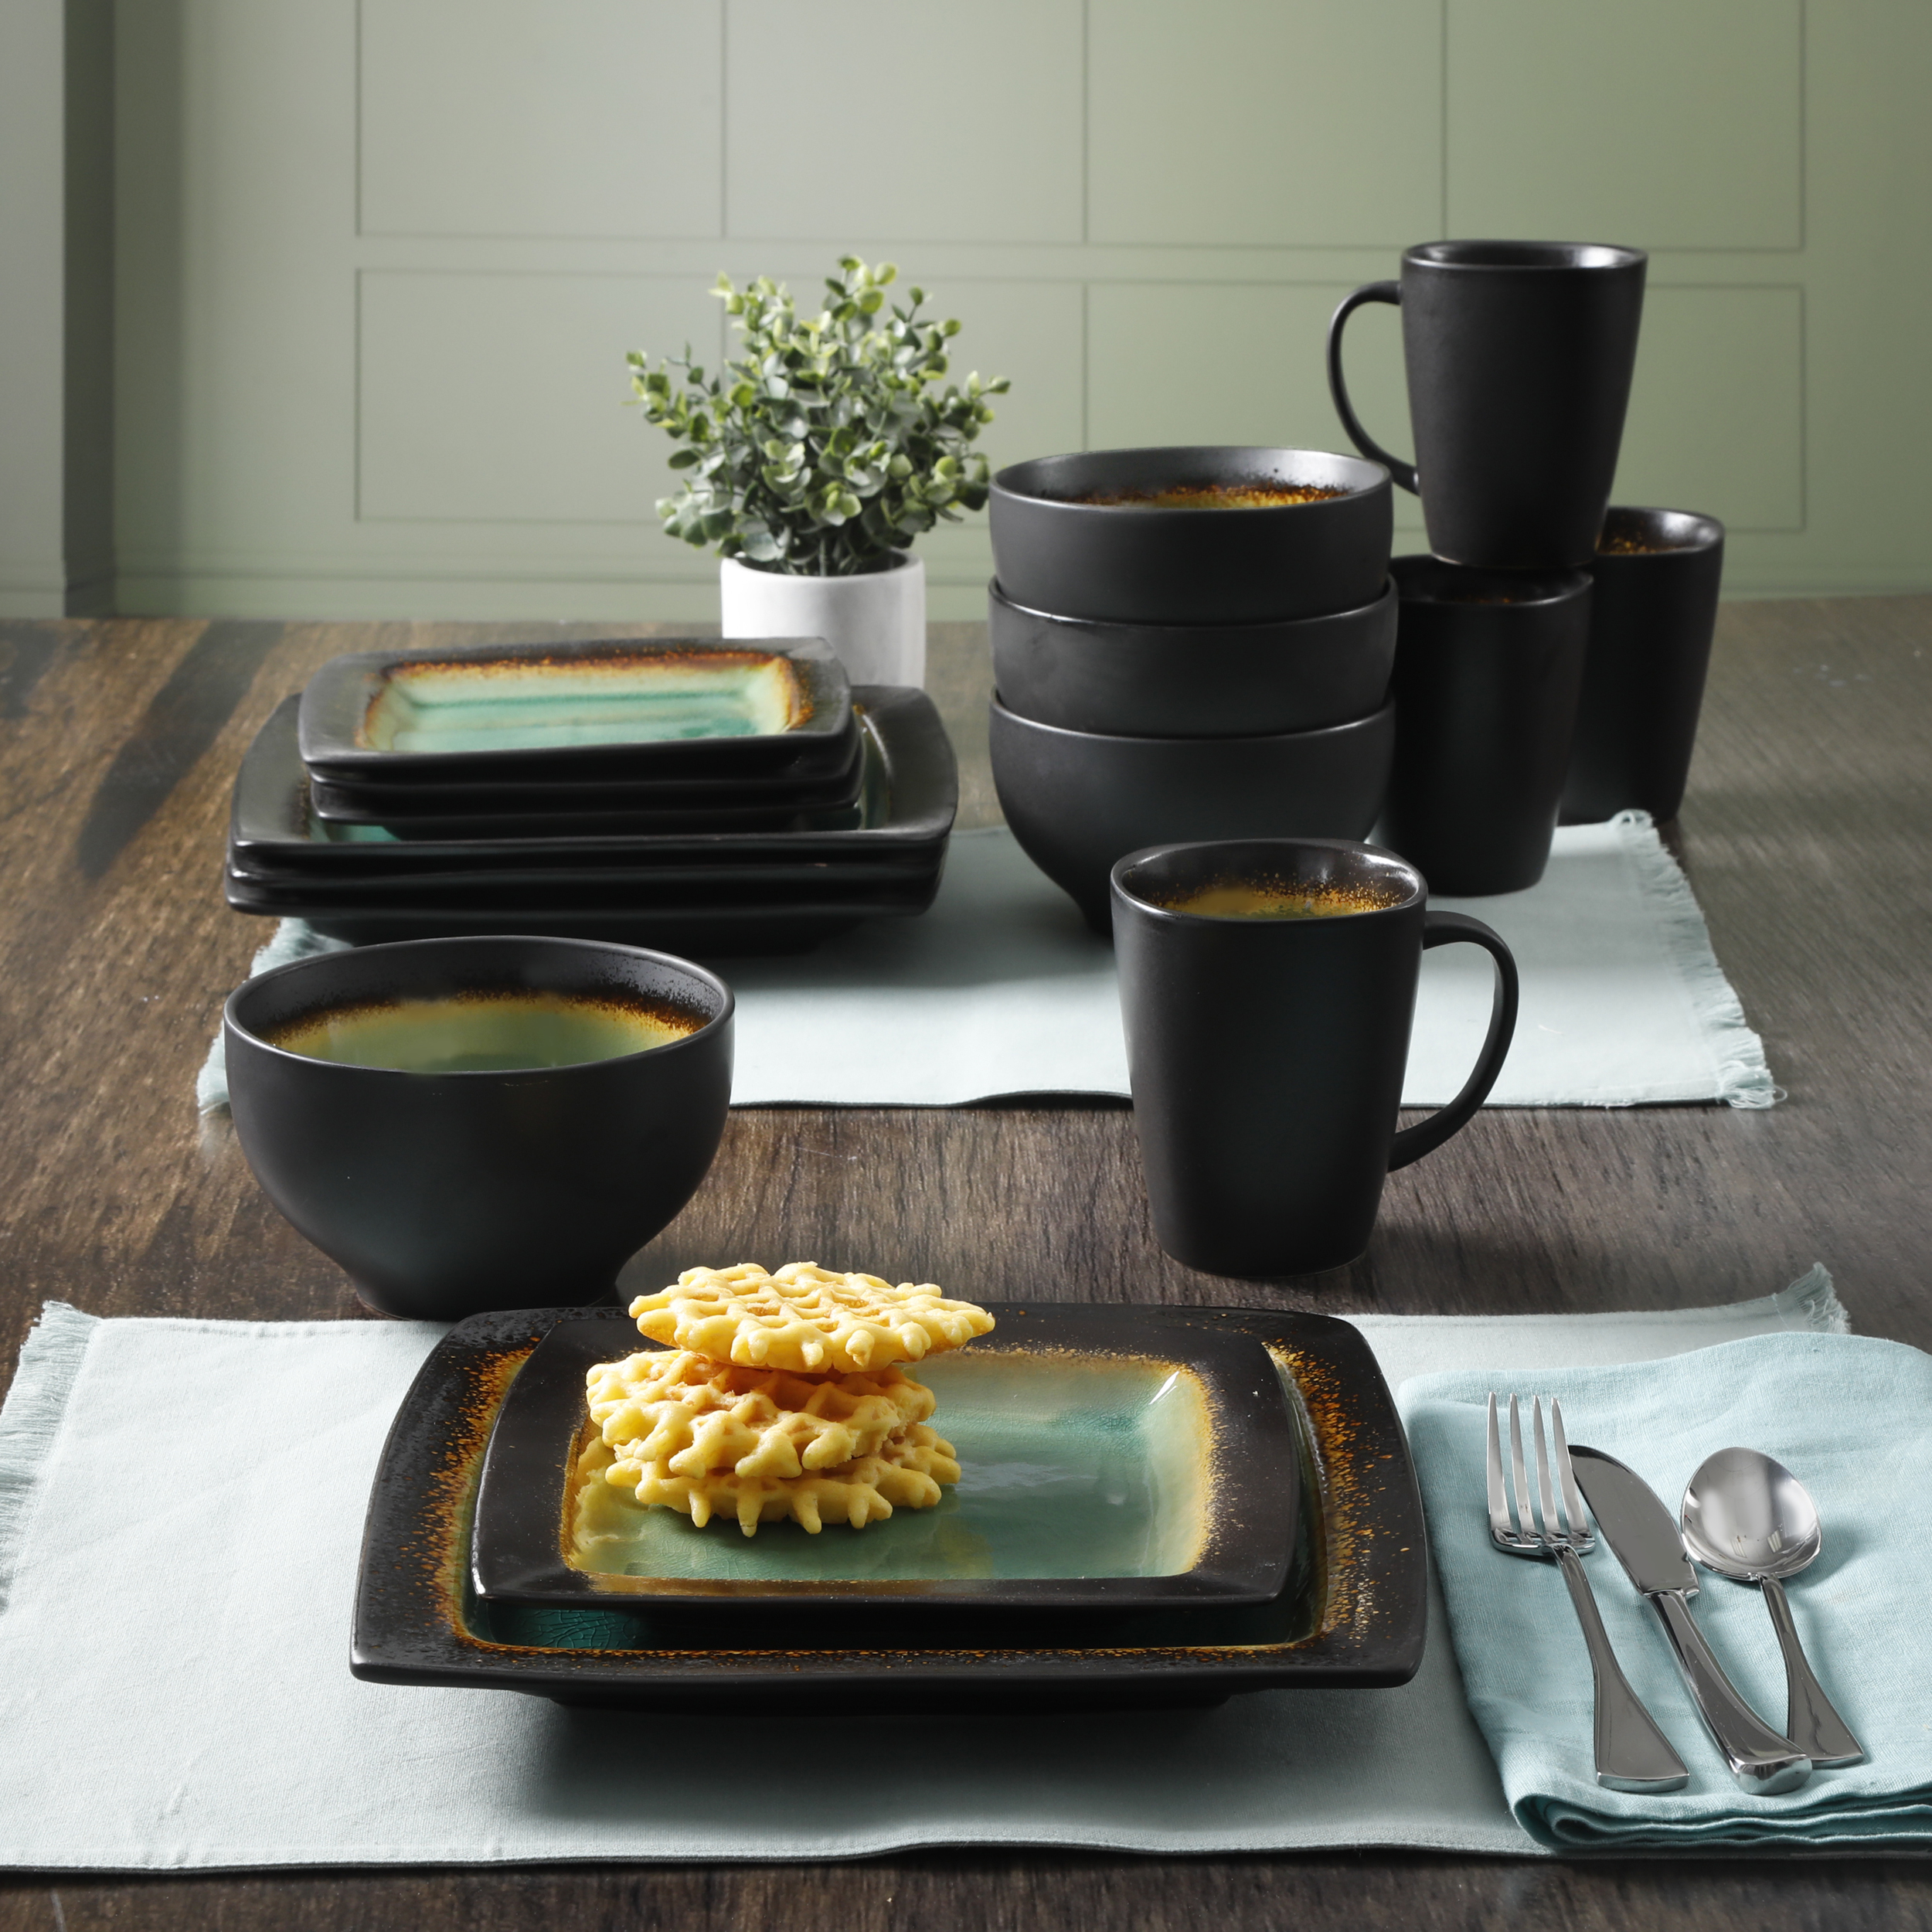 Gibson Home Ocean Oasis 16-Piece Dinnerware Set, Turquoise - image 10 of 10